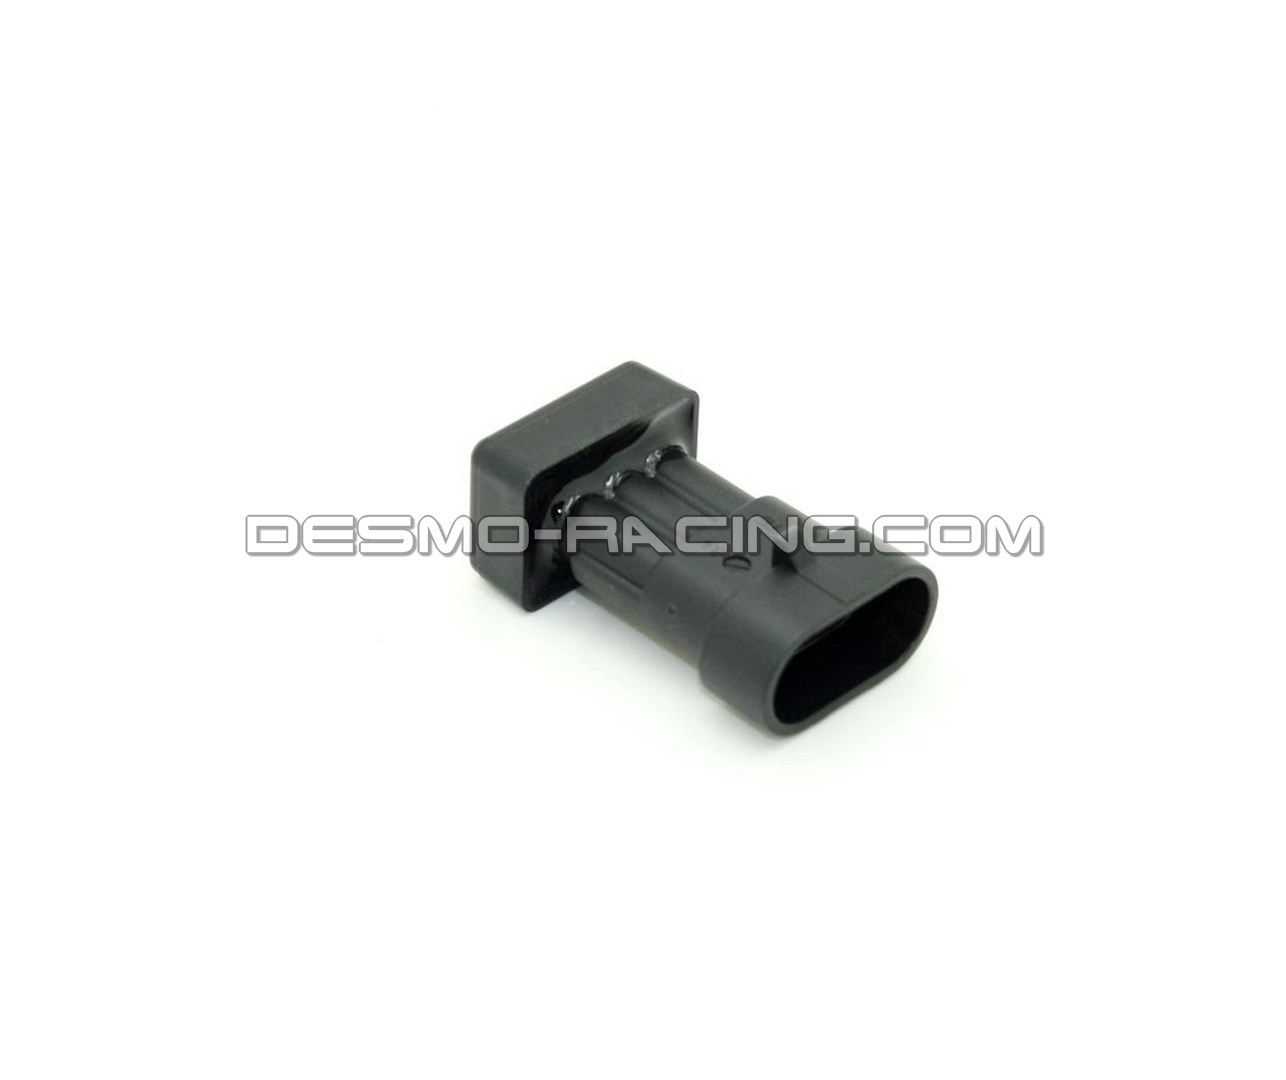 SIDE STAND ELIMINATOR BYPASS CONNECTOR DUCATI - SSB-008